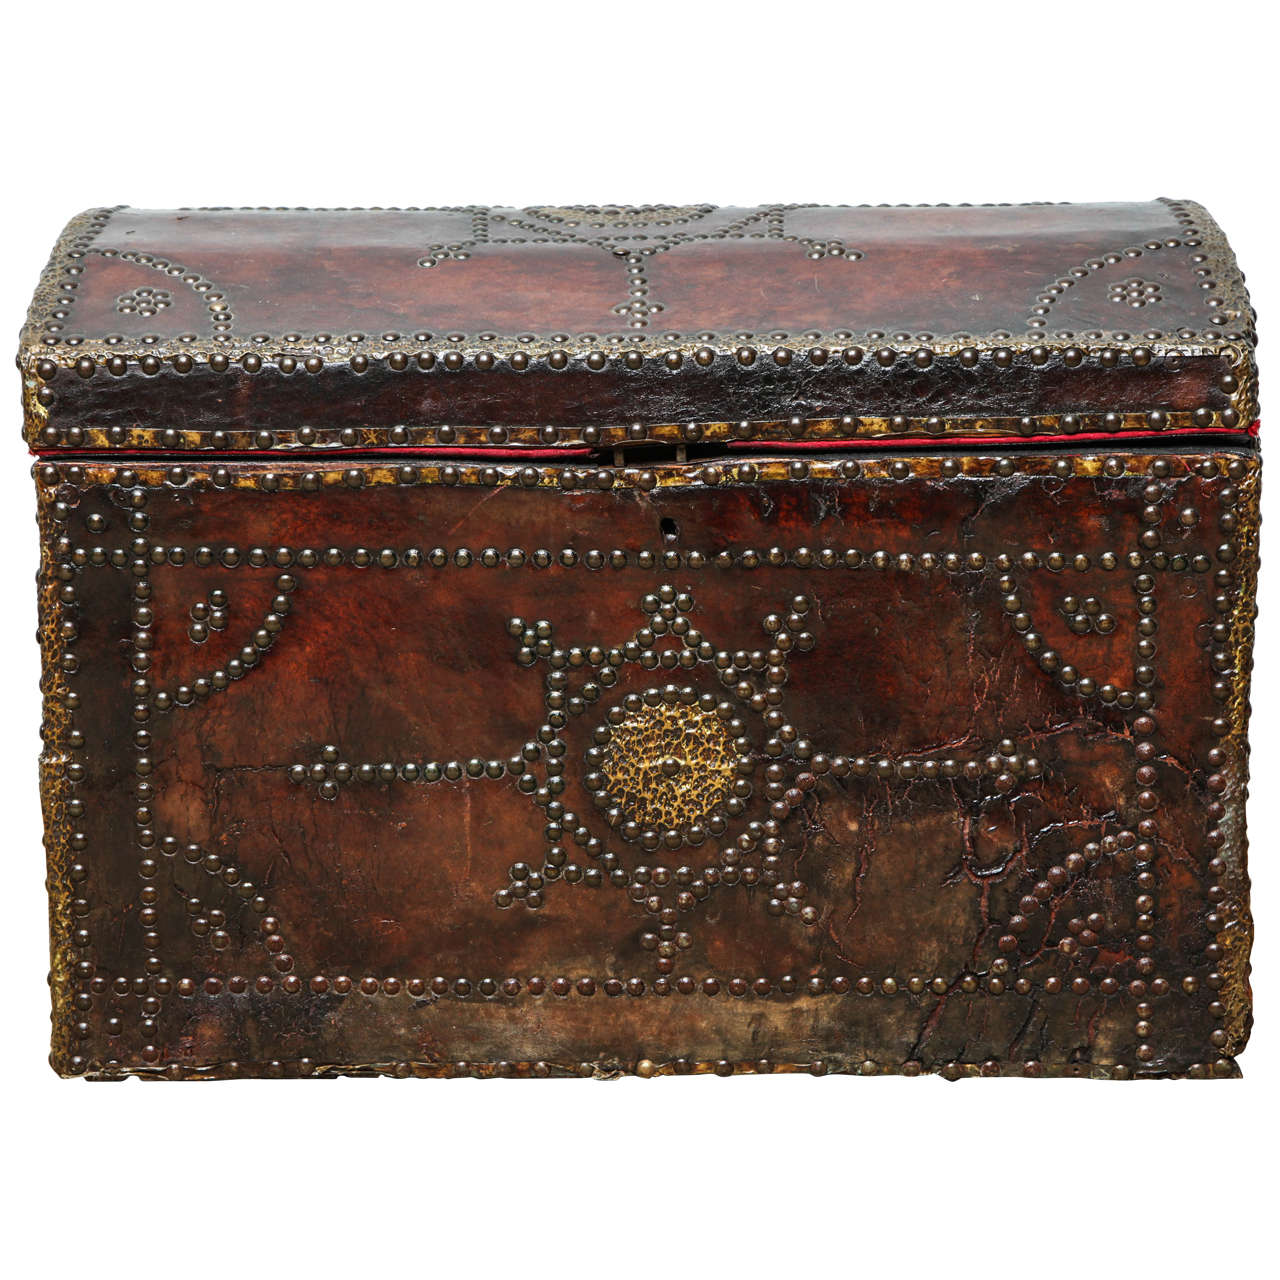 19th-Century Studded Leather Trunk